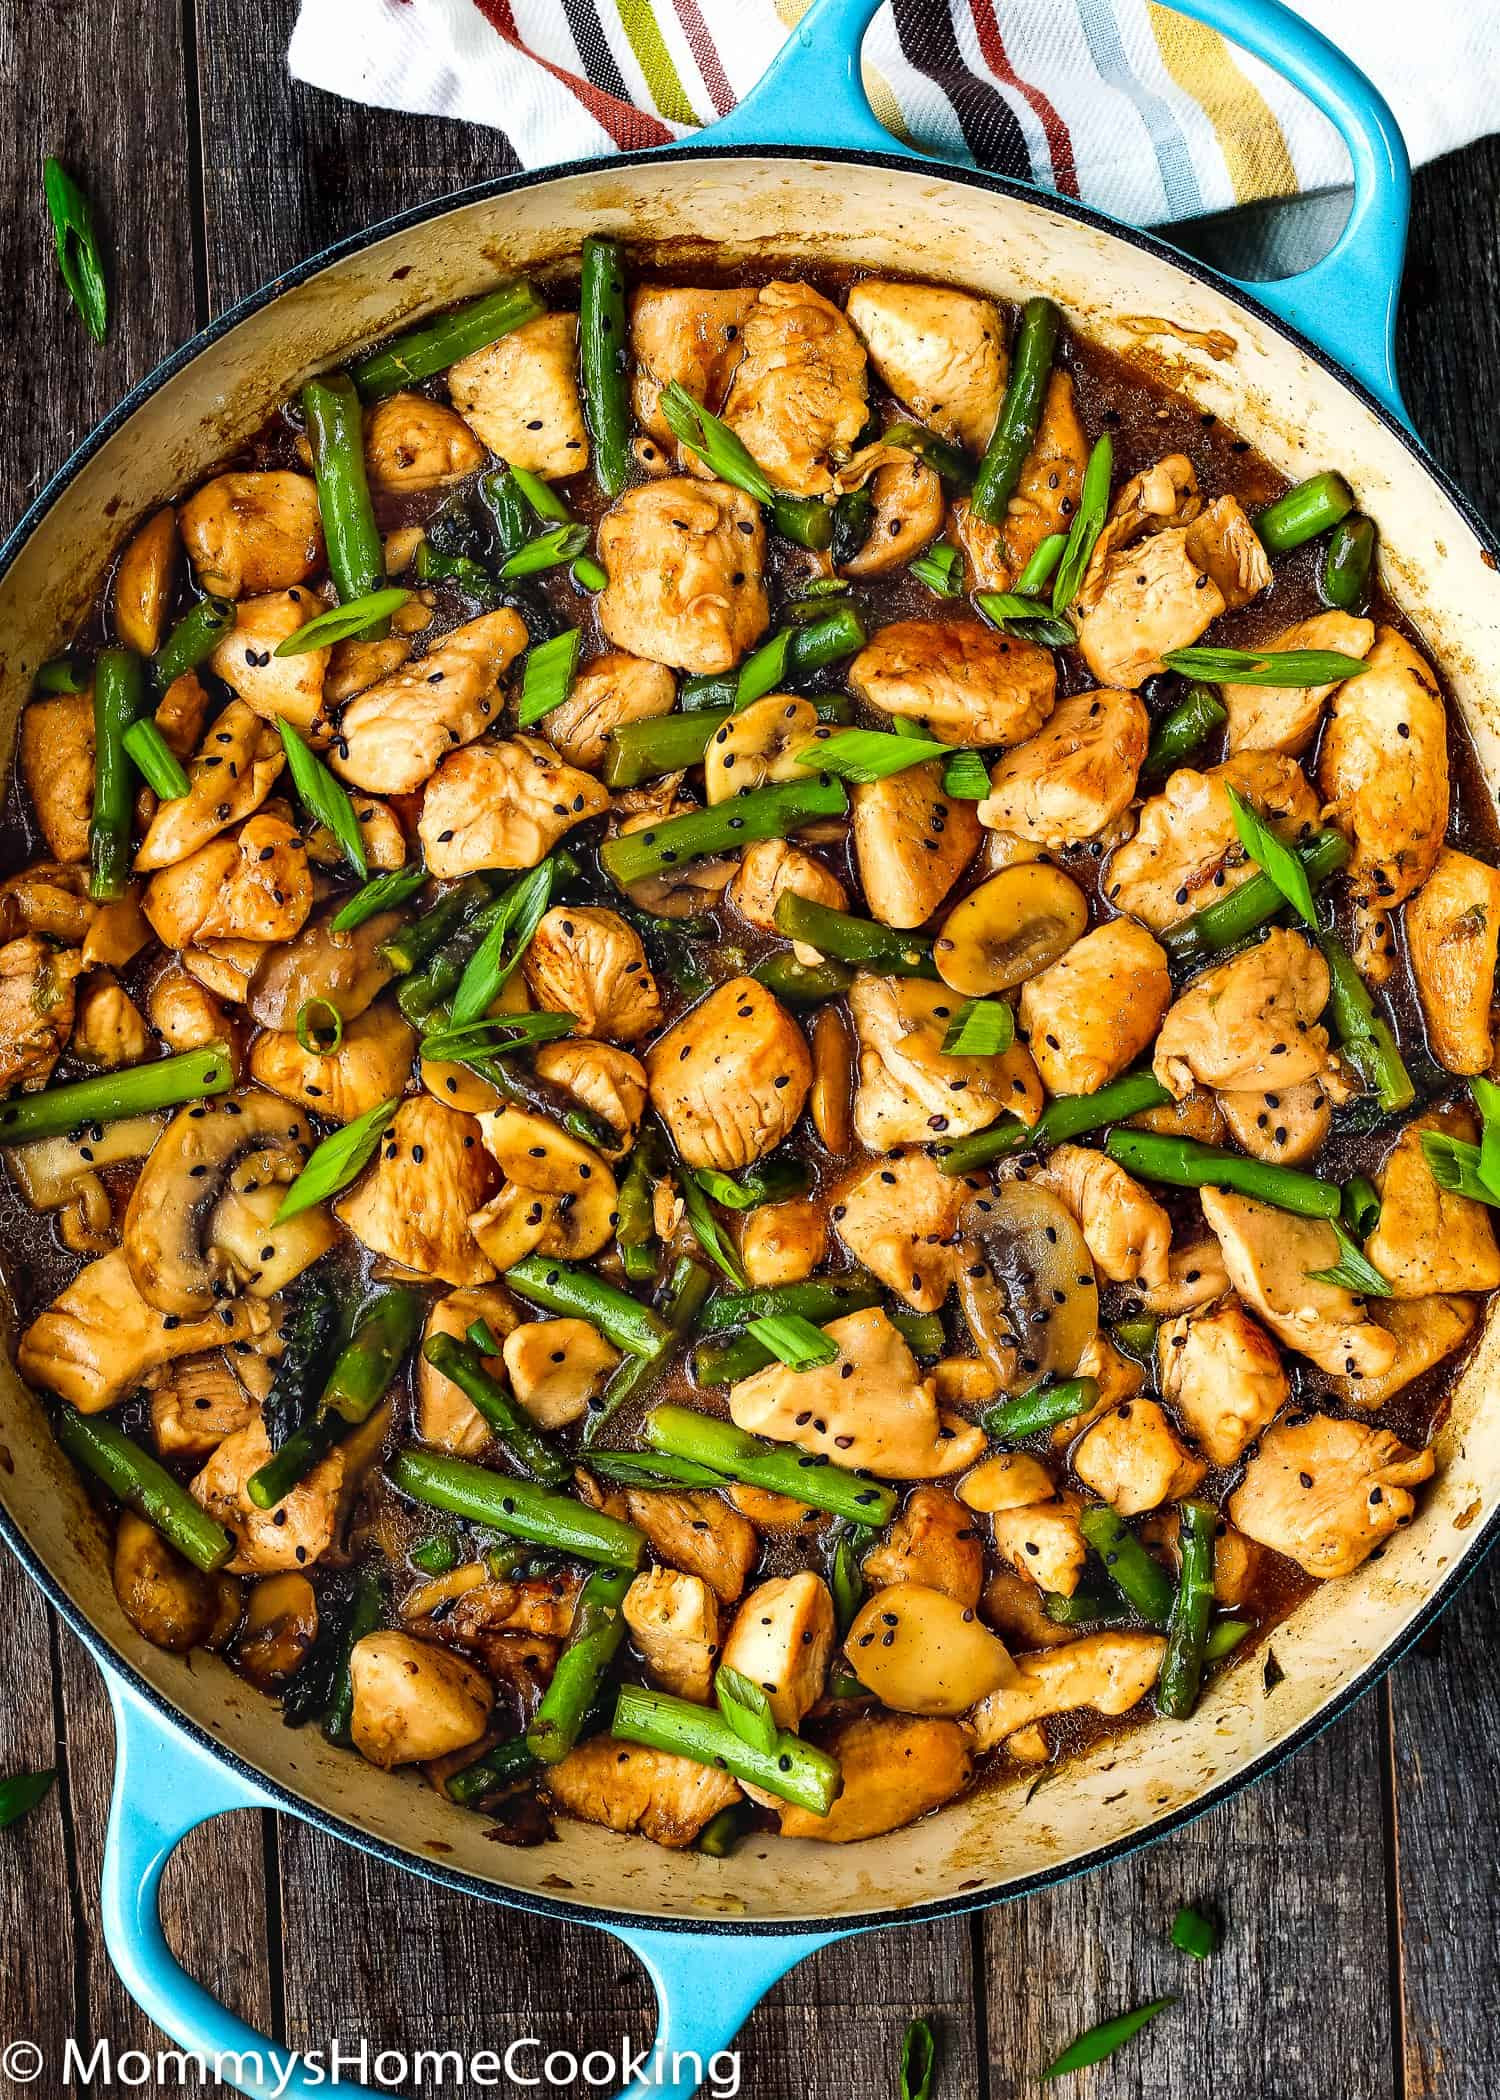 Delicious Healthy Dinner Recipes
 Easy Healthy Chicken and Asparagus Skillet Mommy s Home